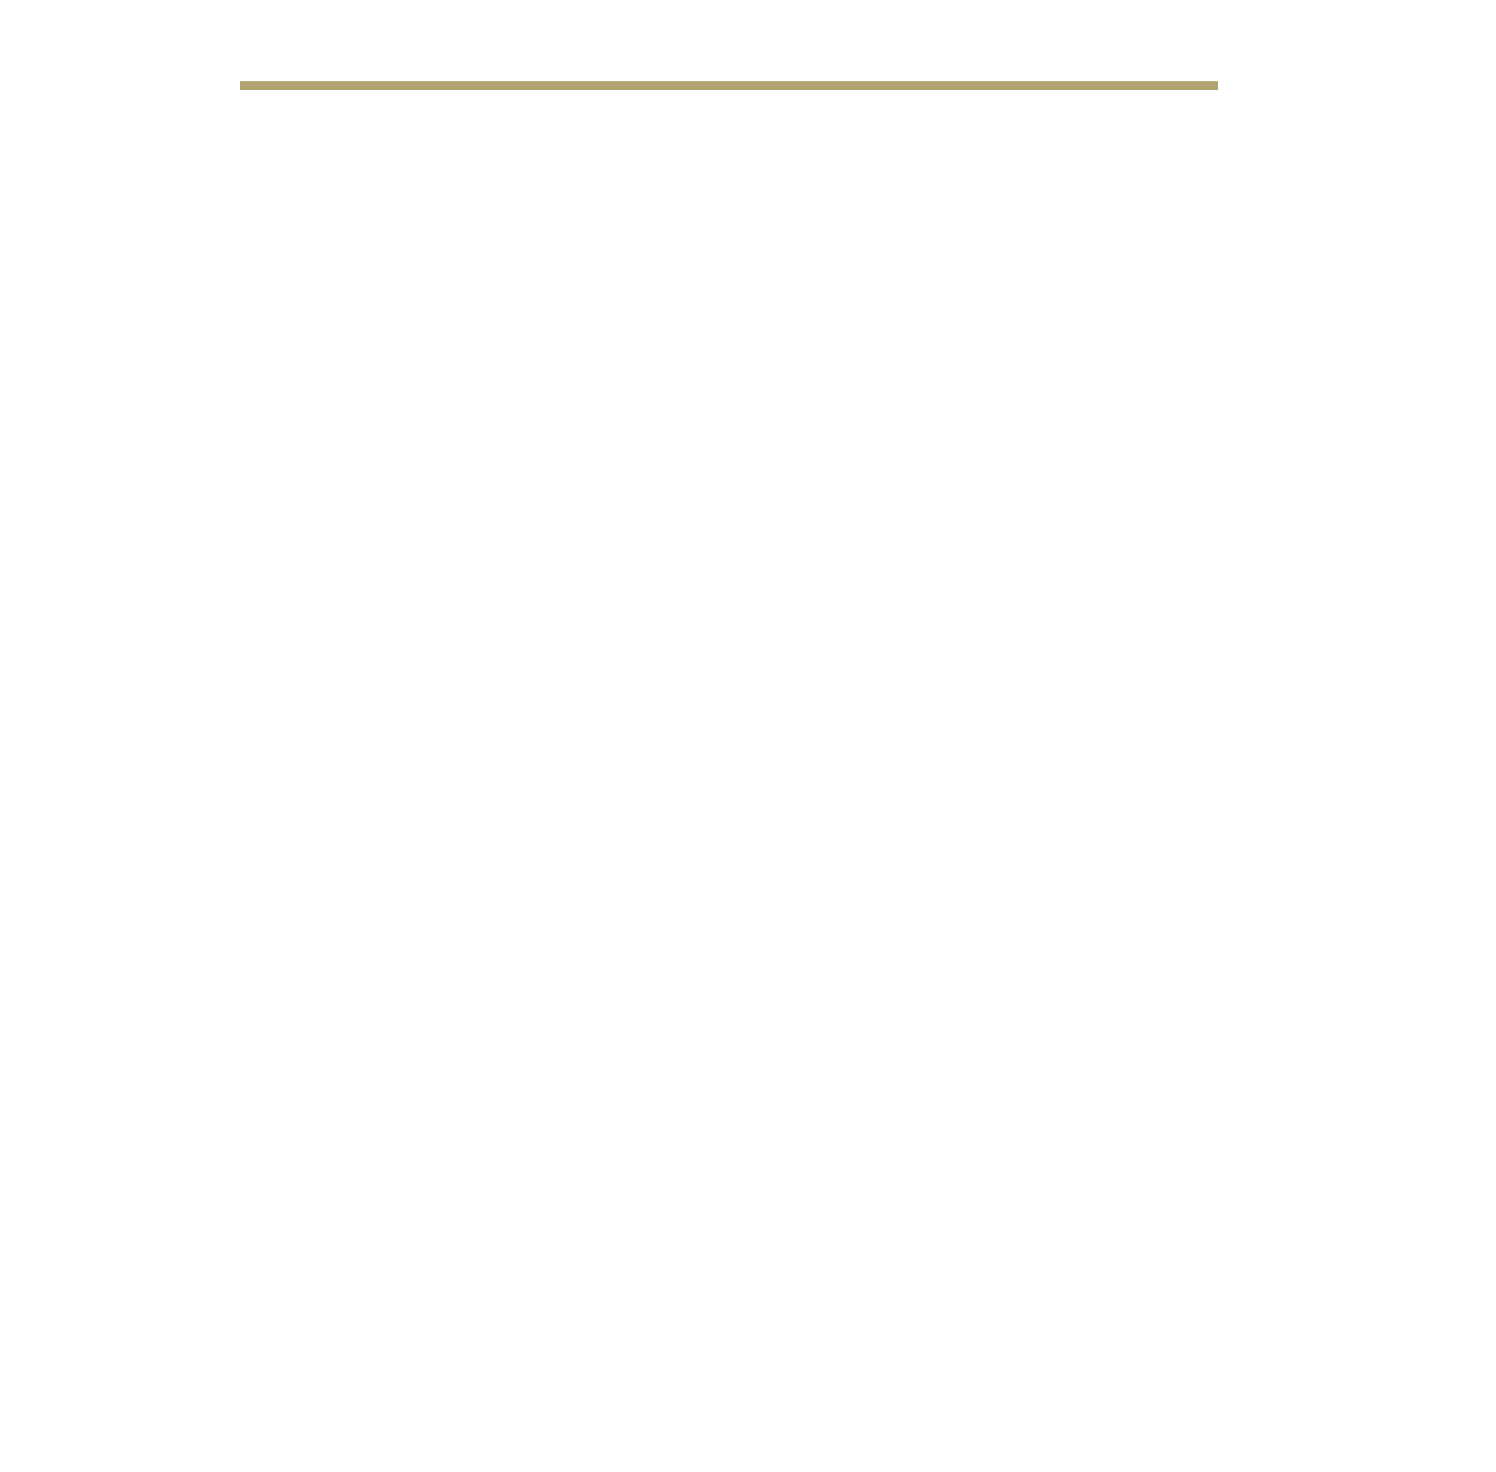 Exciting New Look Coming